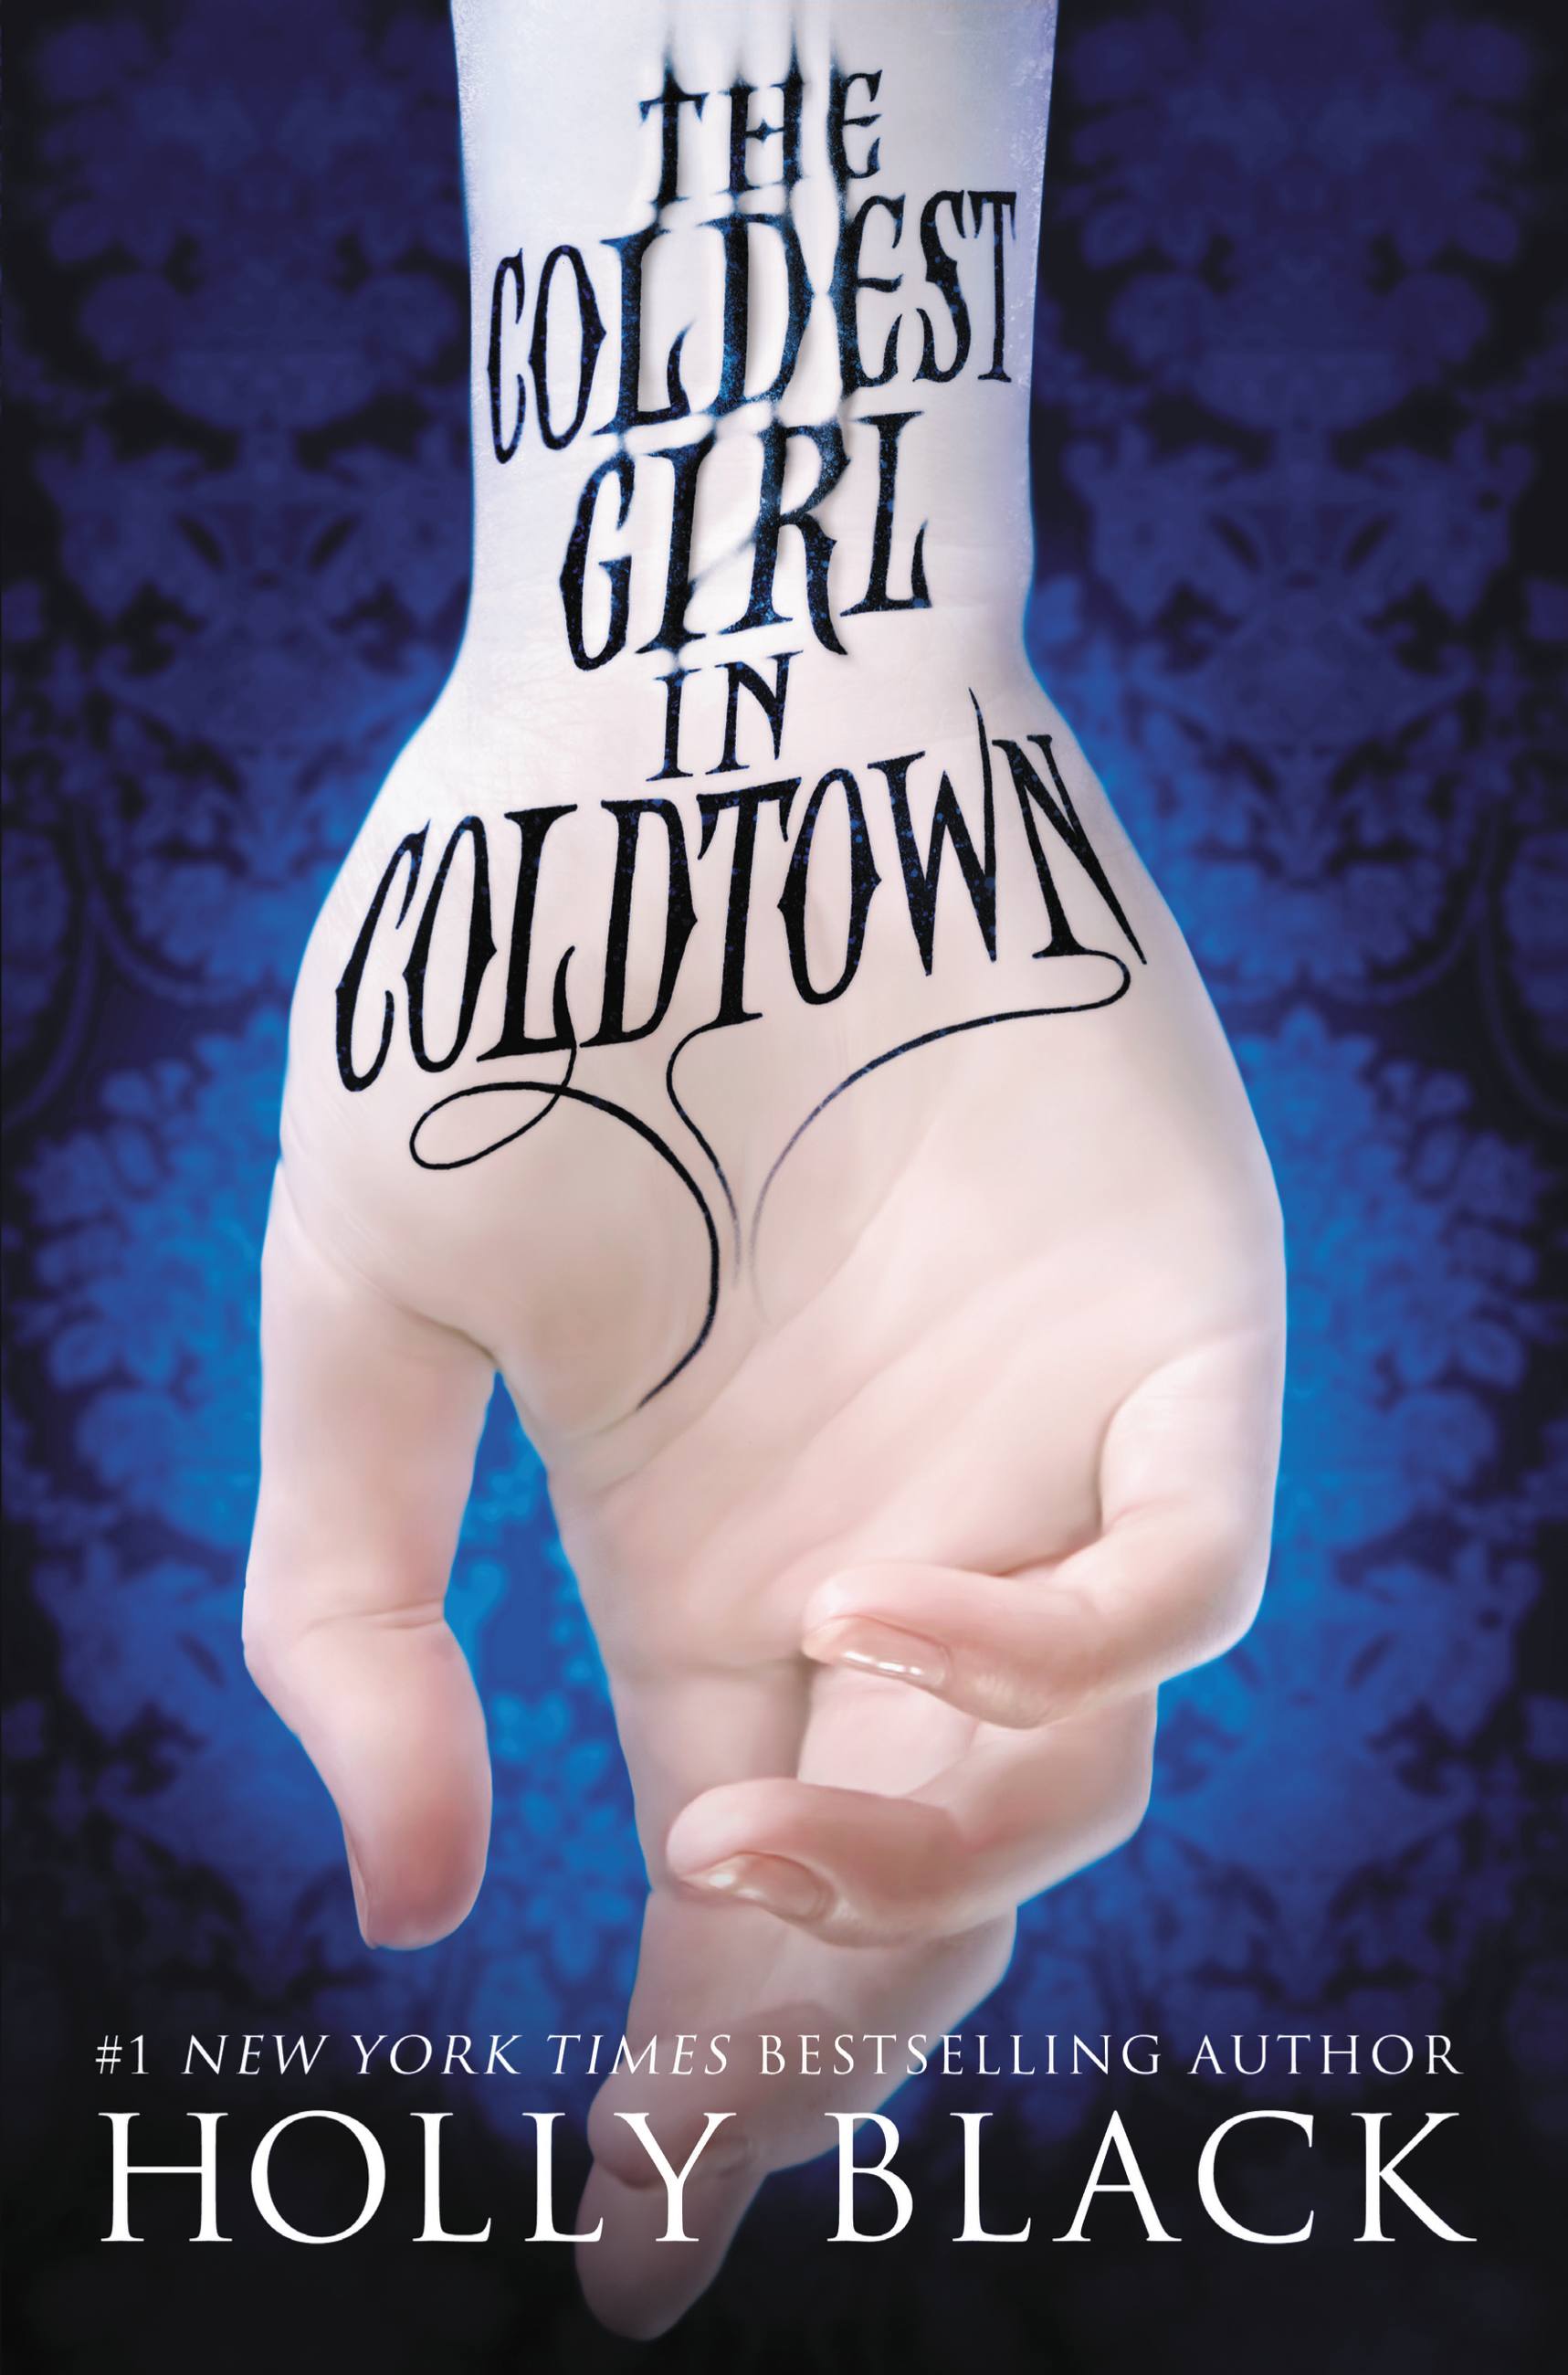 Accepteret alkove underholdning The Coldest Girl in Coldtown by Holly Black | Hachette Book Group